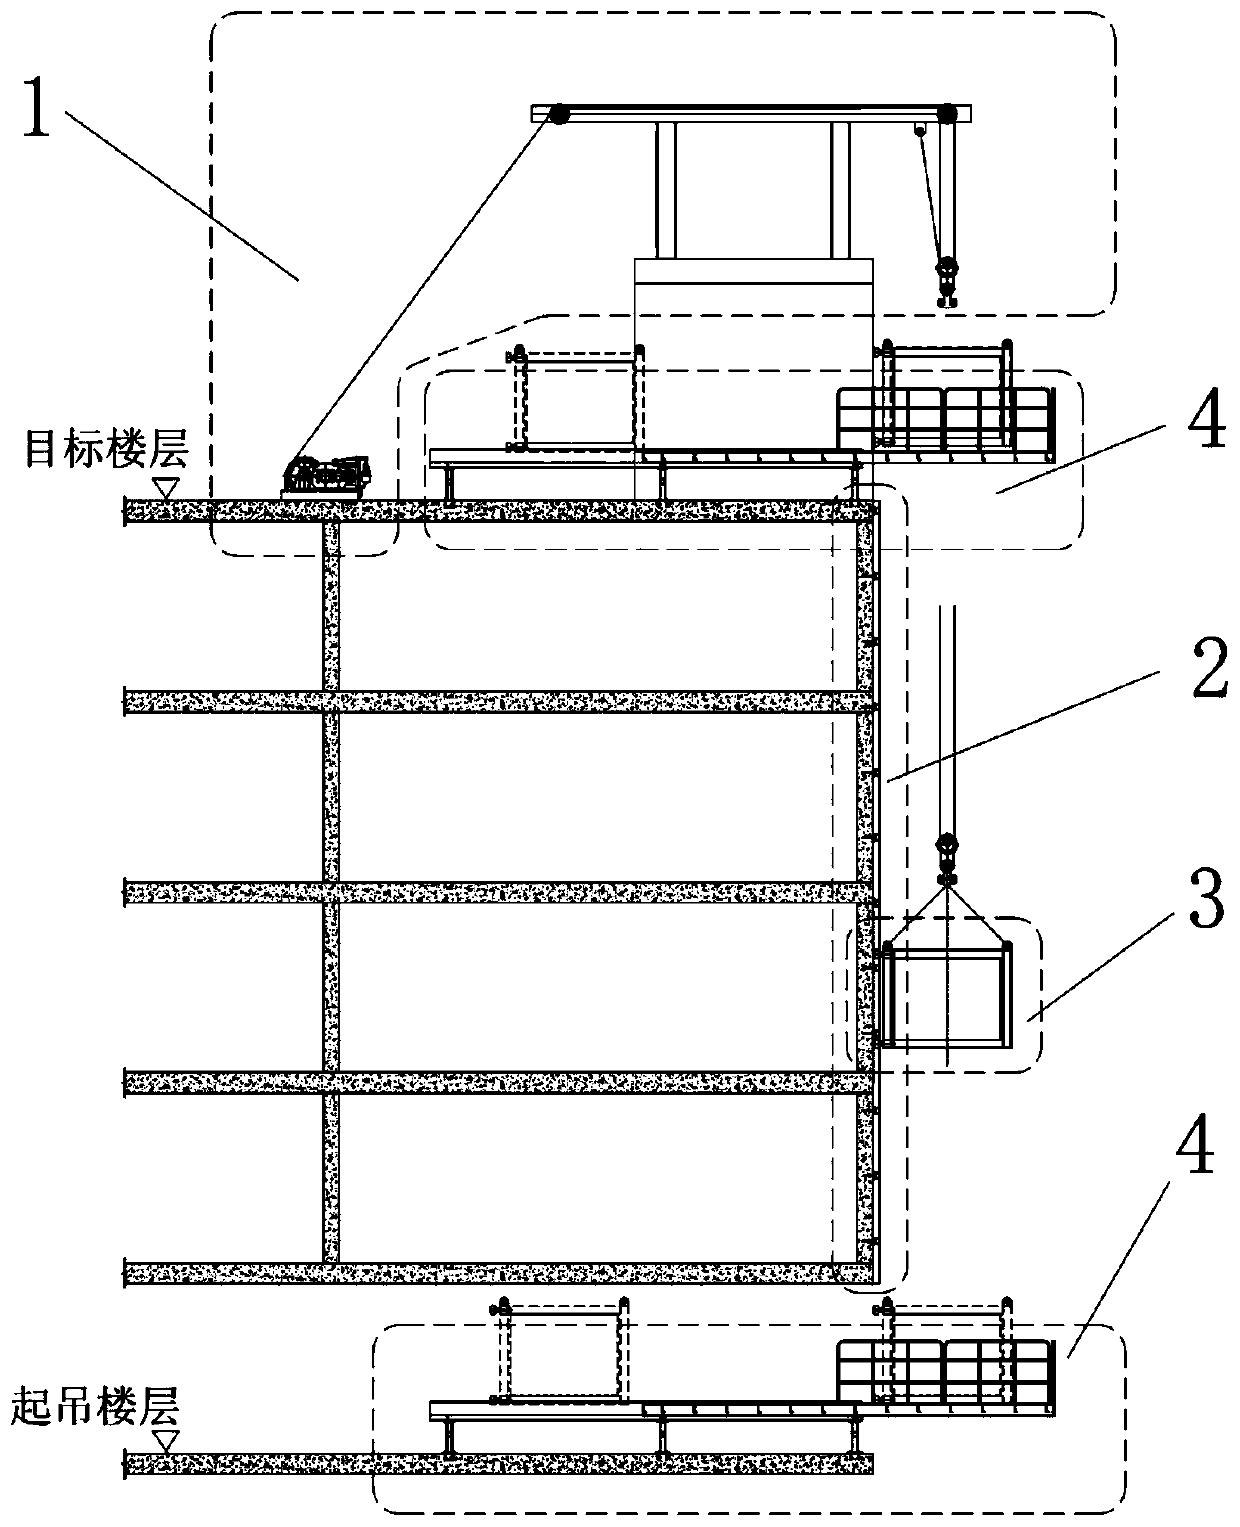 Outer attached type high-rise building goods hoisting system